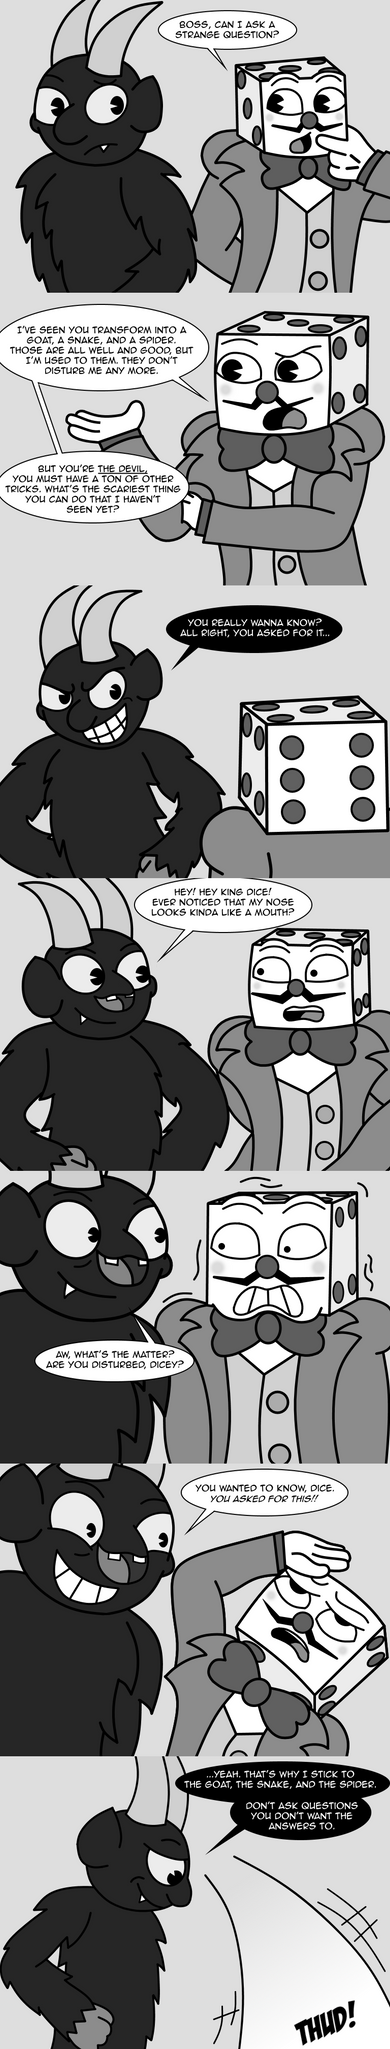 Cuphead Comic: Now He Nose by ElectricBlueTempest on DeviantArt